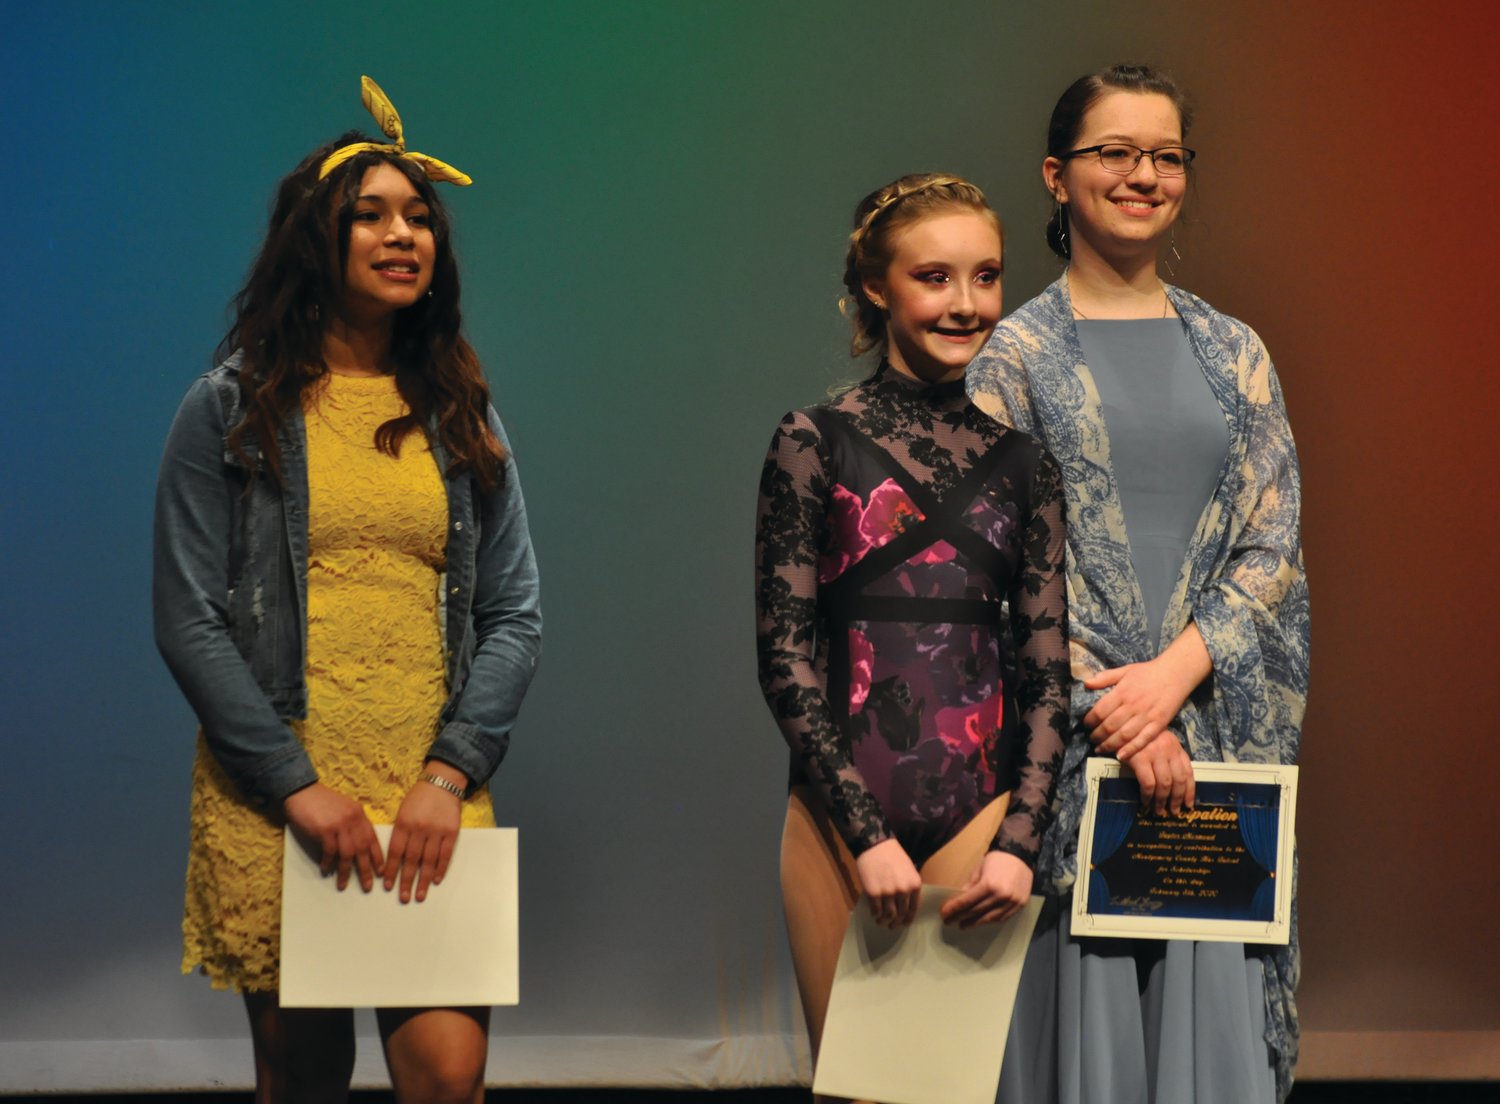 MoCo's Got Talent for Scholarships winner Dericka Jeffers, center, is flanked by second place finisher Angelina Leon-Leyva and third place finisher Taylor Mermoud Saturday at Crawfordsville High School.